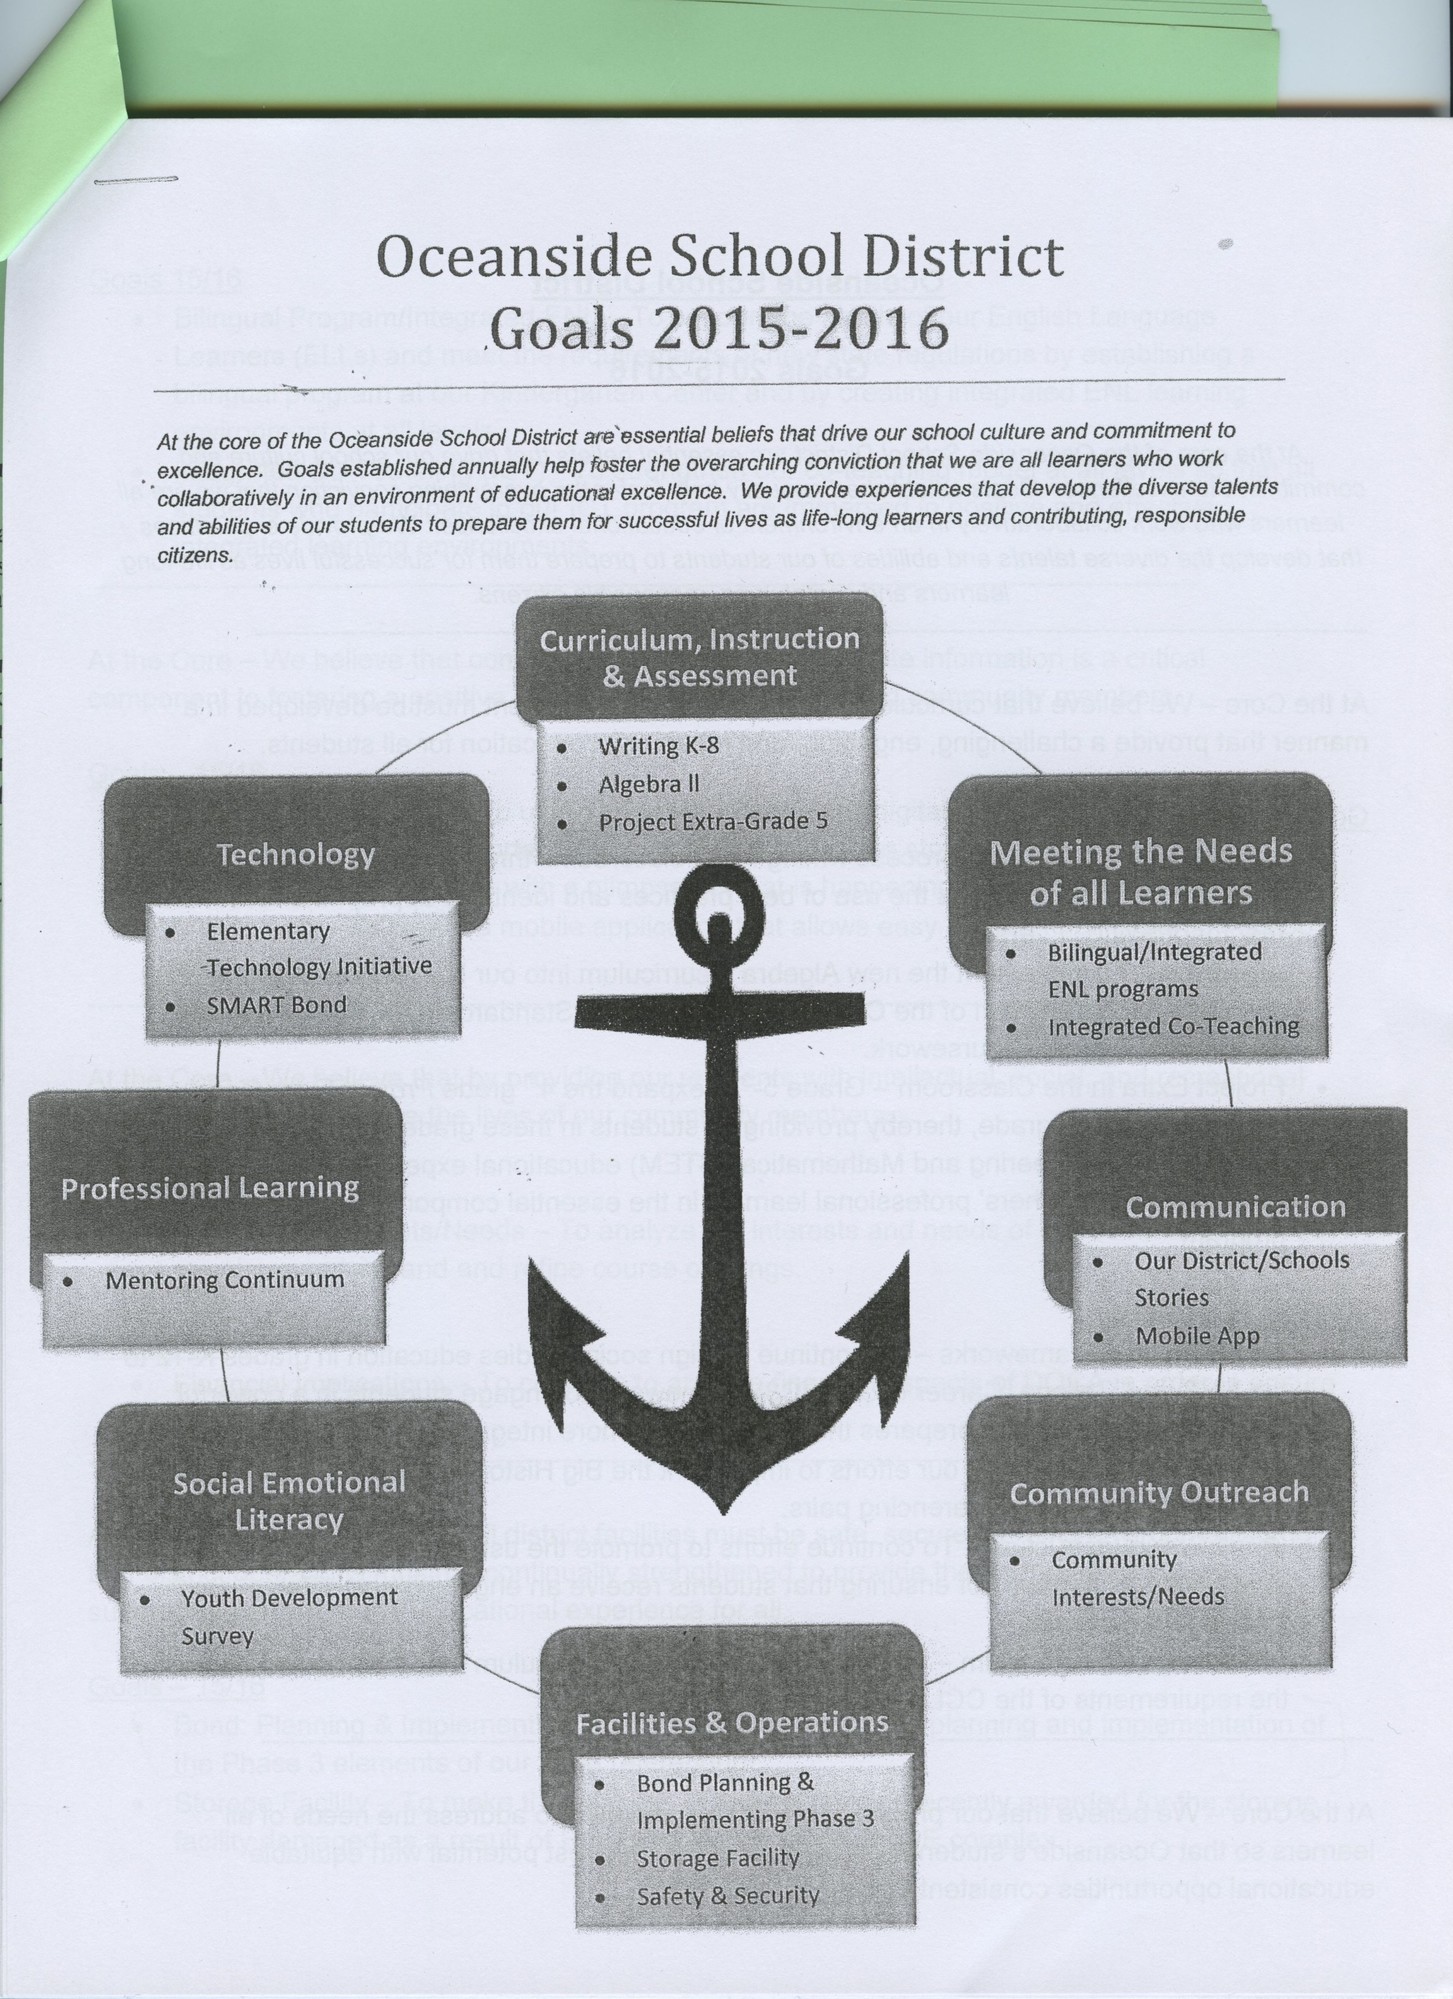 The Oceanside School District’s goals are grouped into different core beliefs.